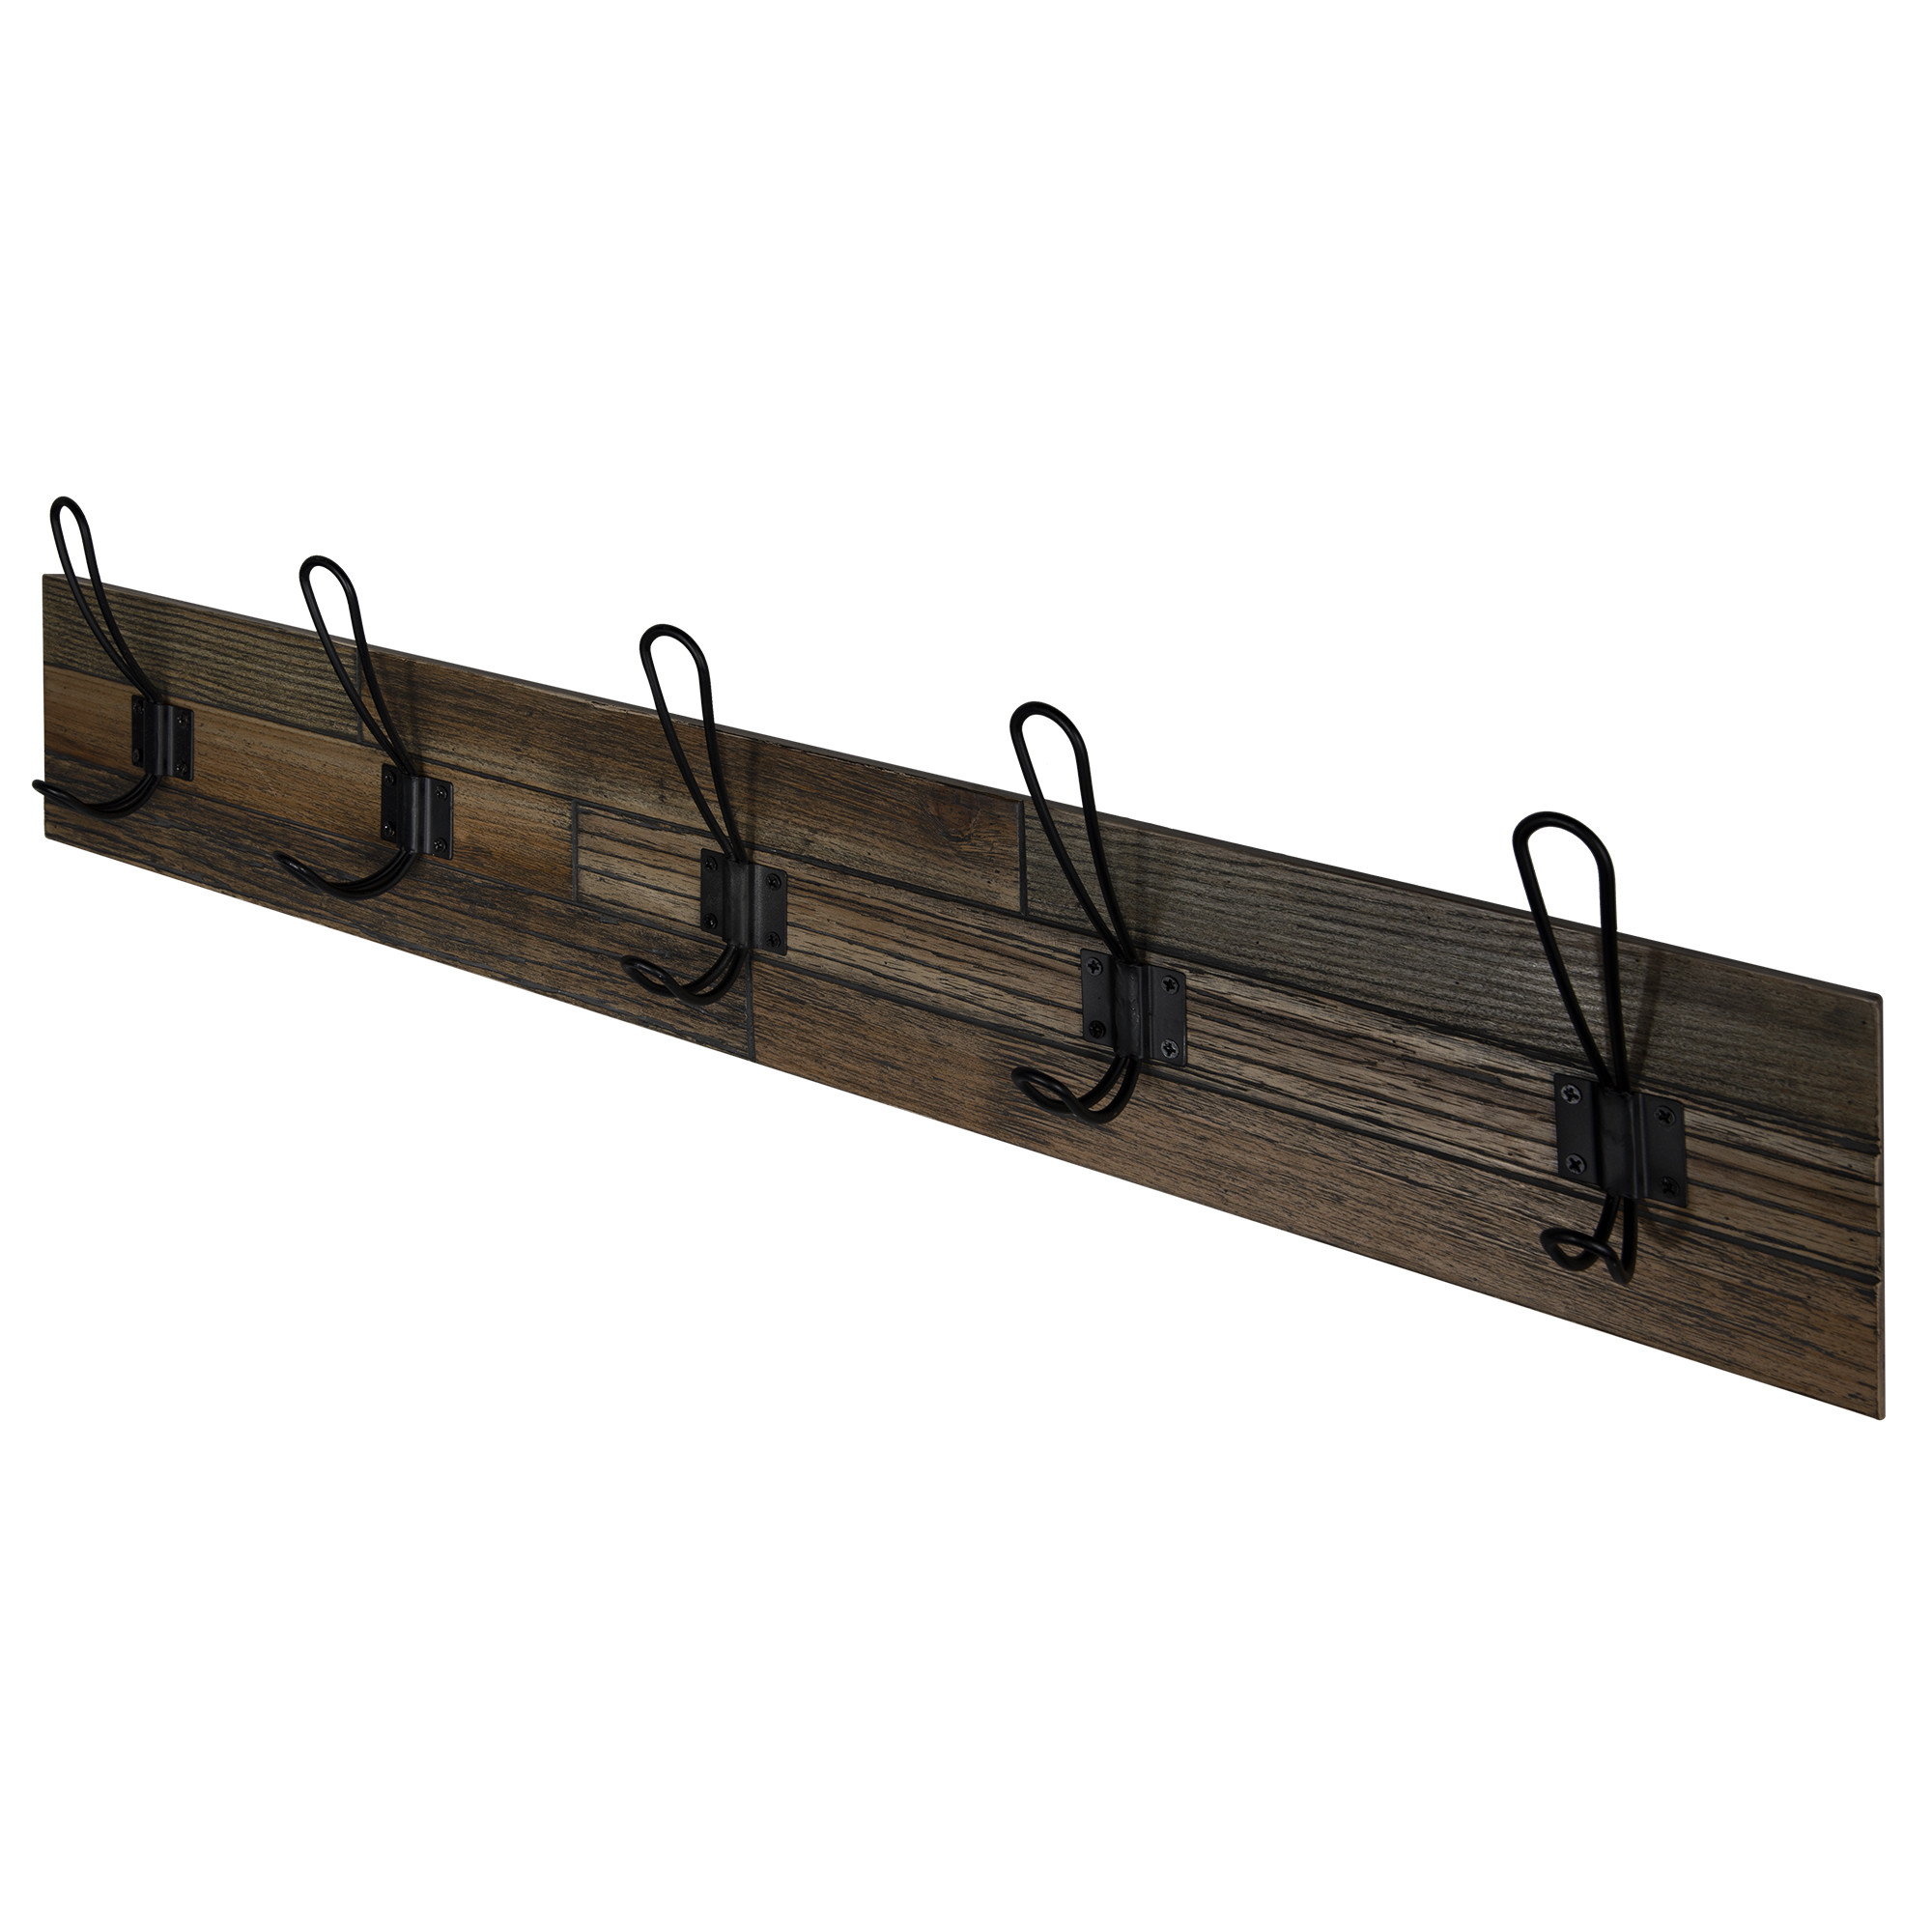 Stratton Home Decor Industrial Wood Wall Hooks